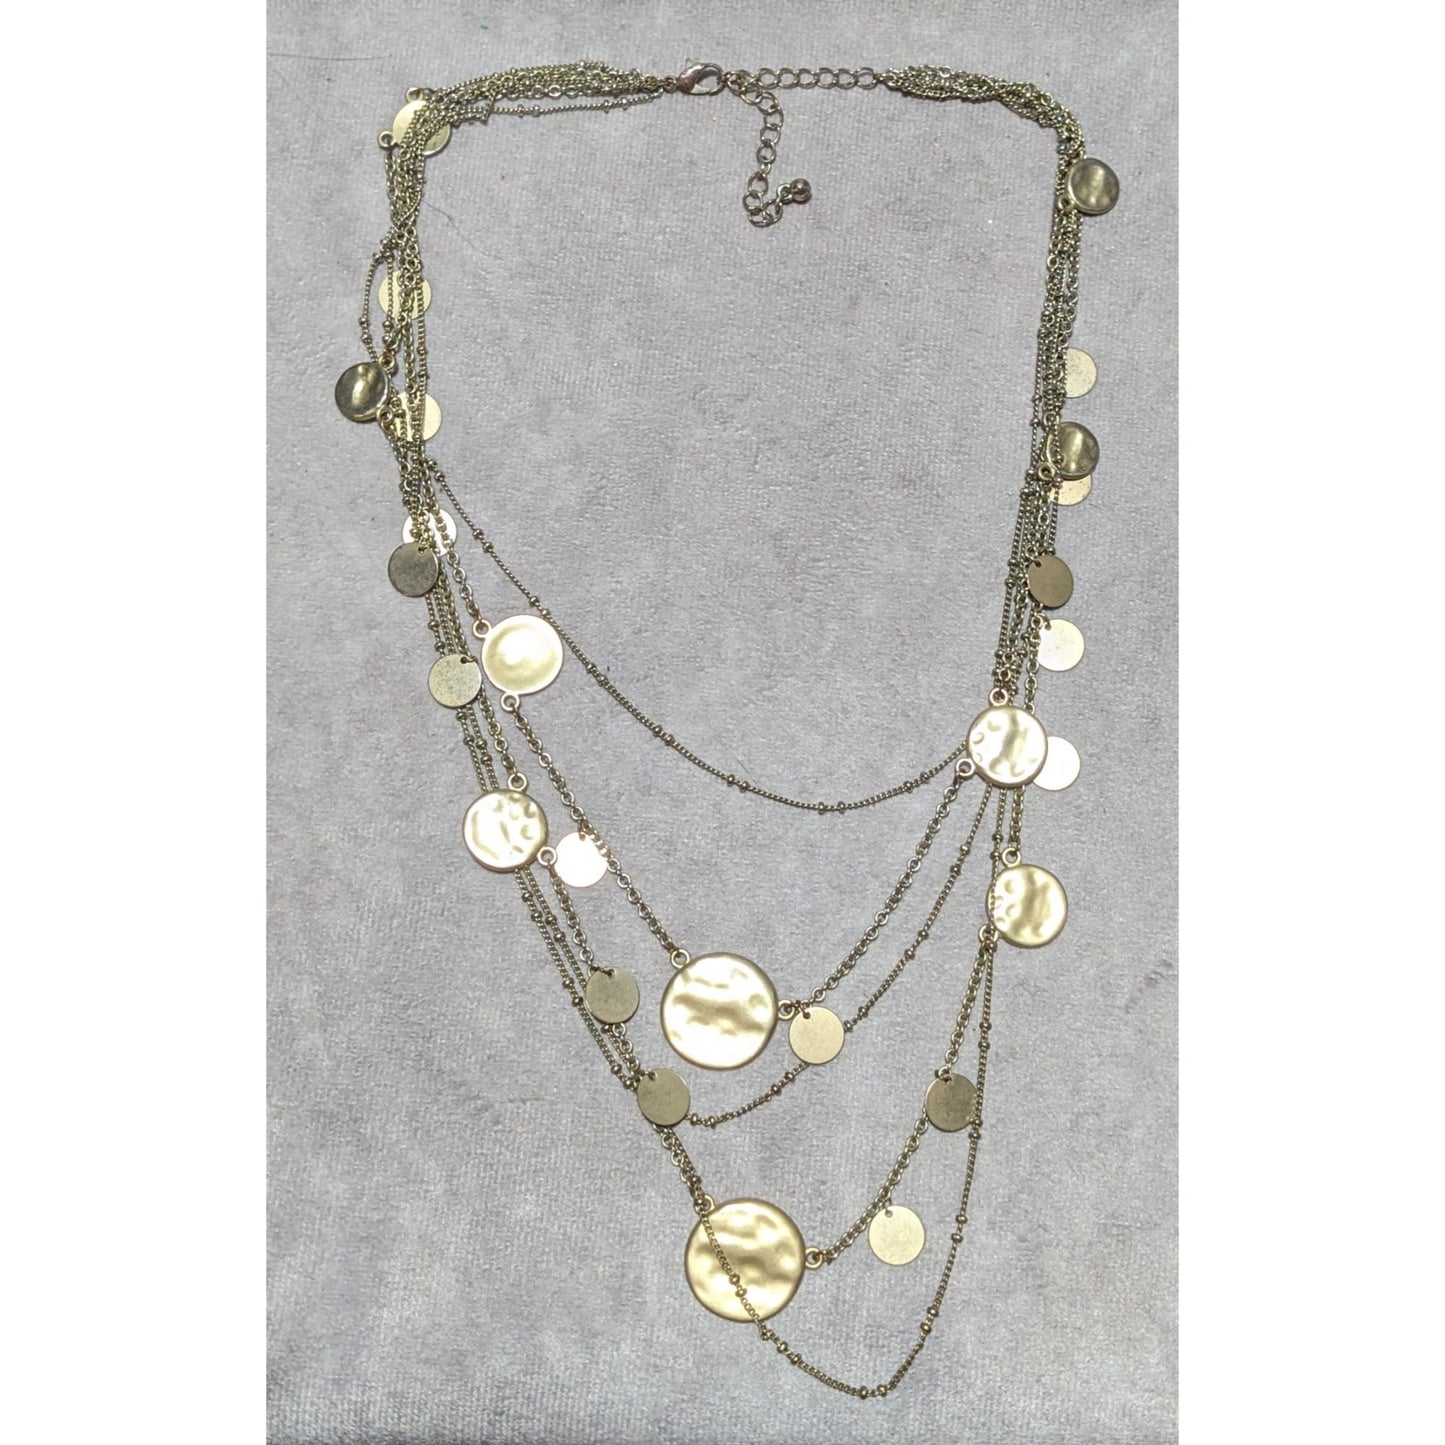 Gold Tone Multilayer Hammered Disc Chain Necklace